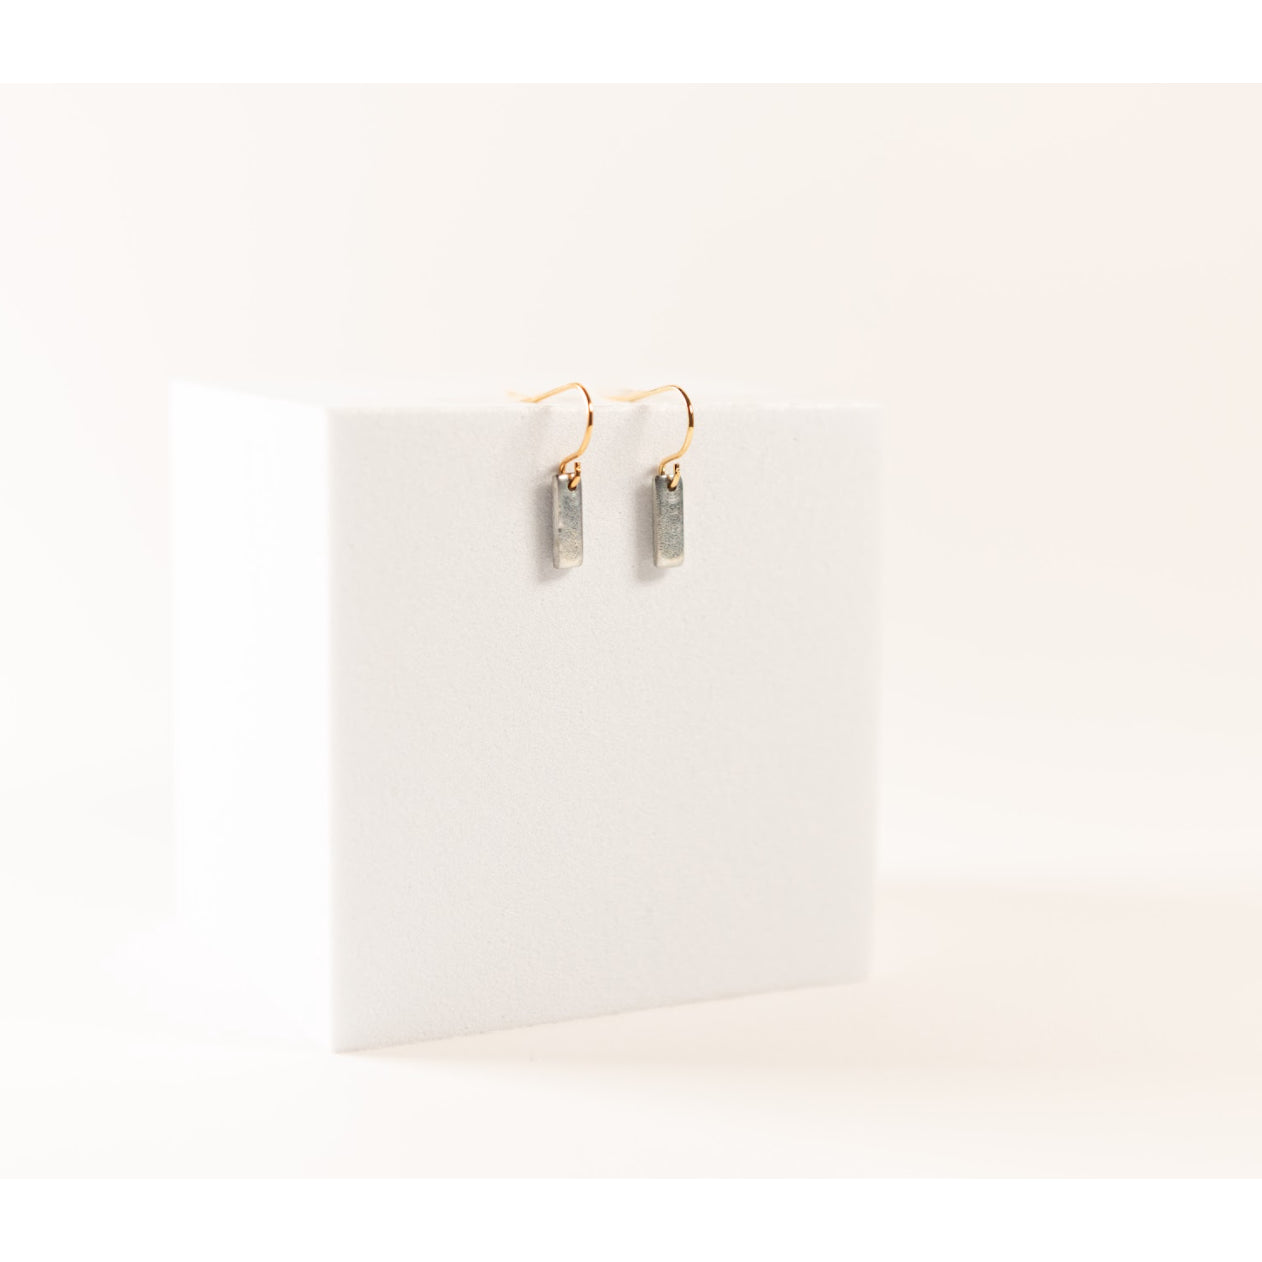 Mend On The Move Tiny Bar Earrings